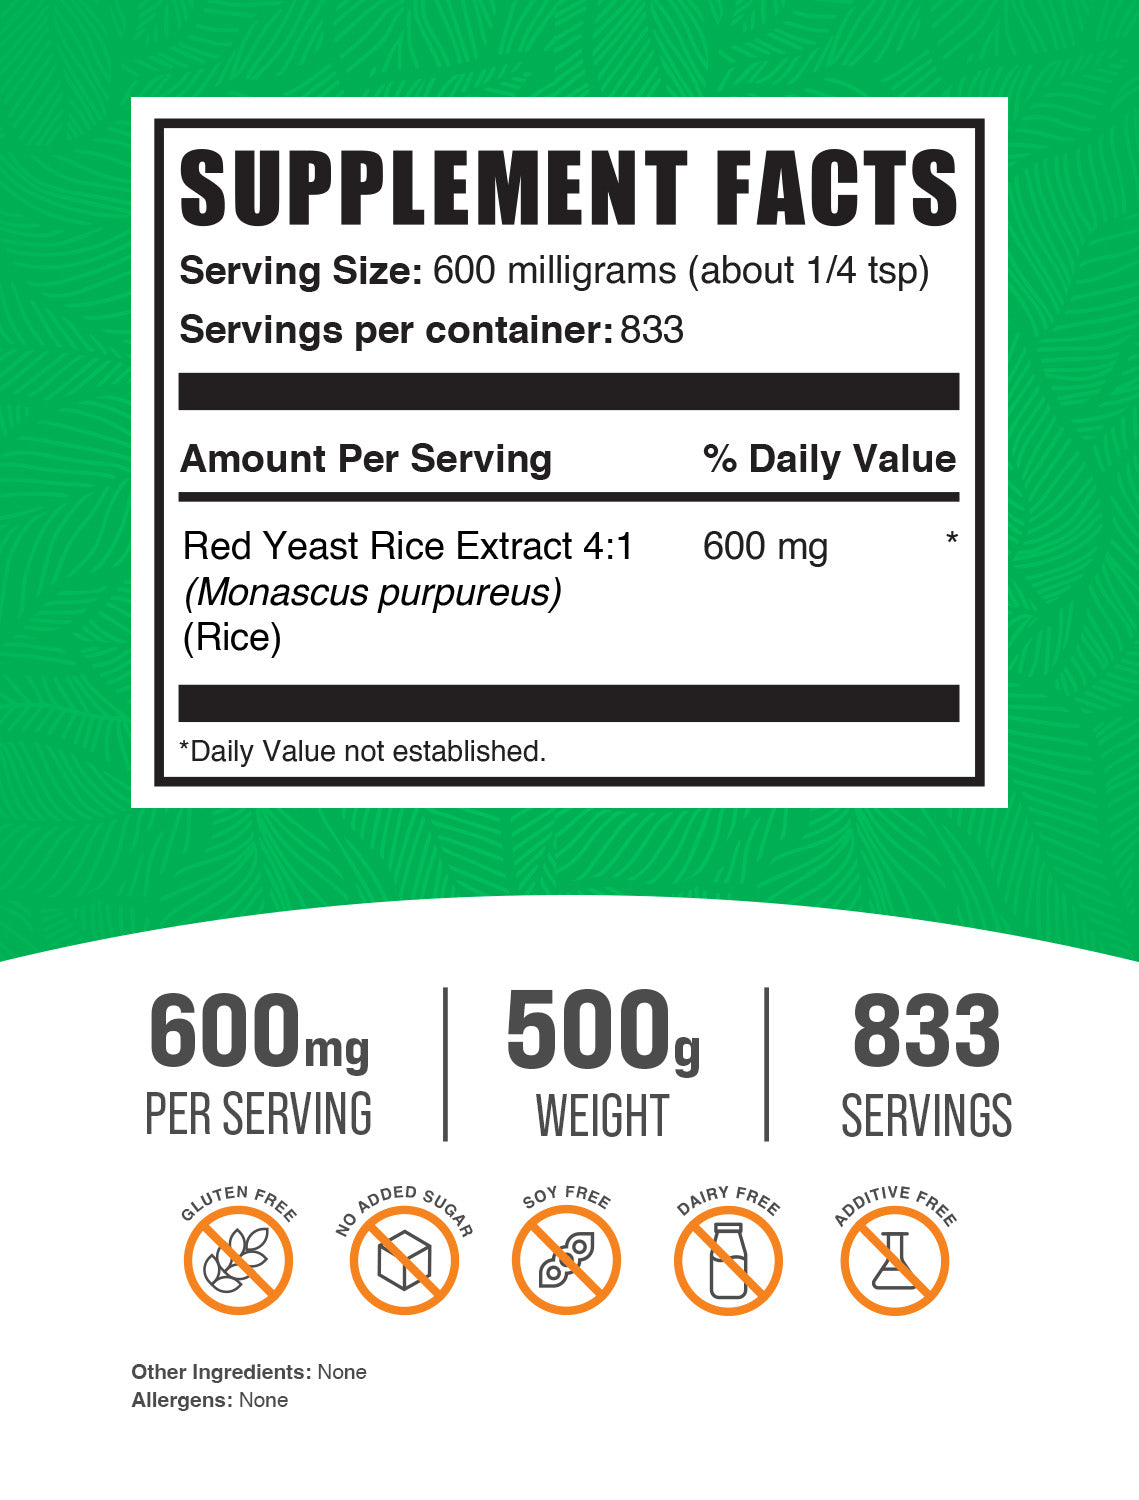 Red Yeast Rice Extract powder label 500g